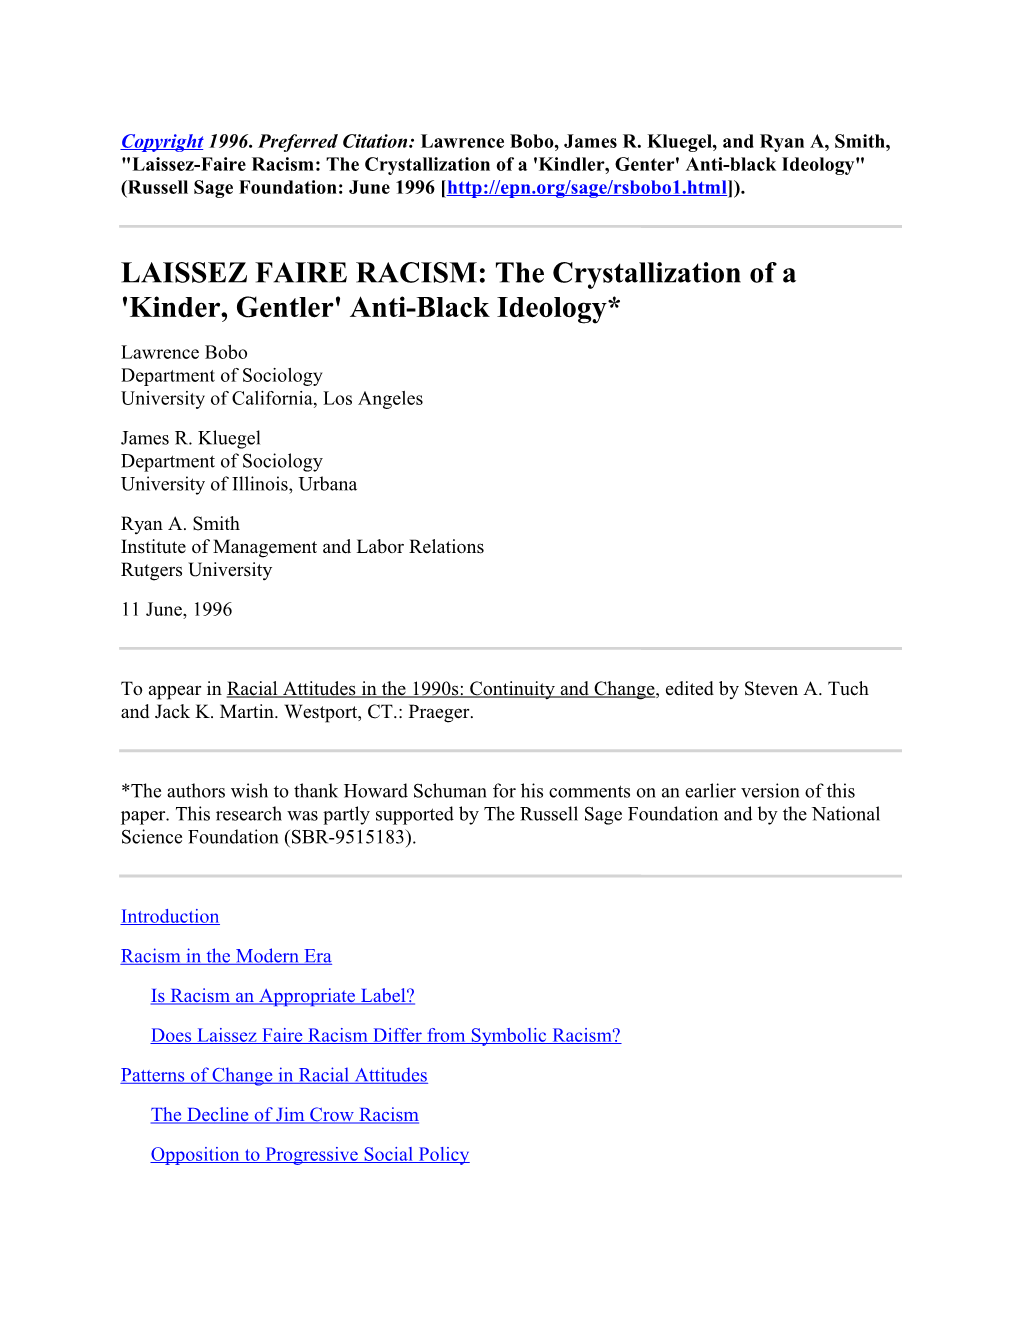 Russell Sage Foundation, L Bobo, J. Kluegel, R. Smith, Laissez-Faire Racism: the Crystallization